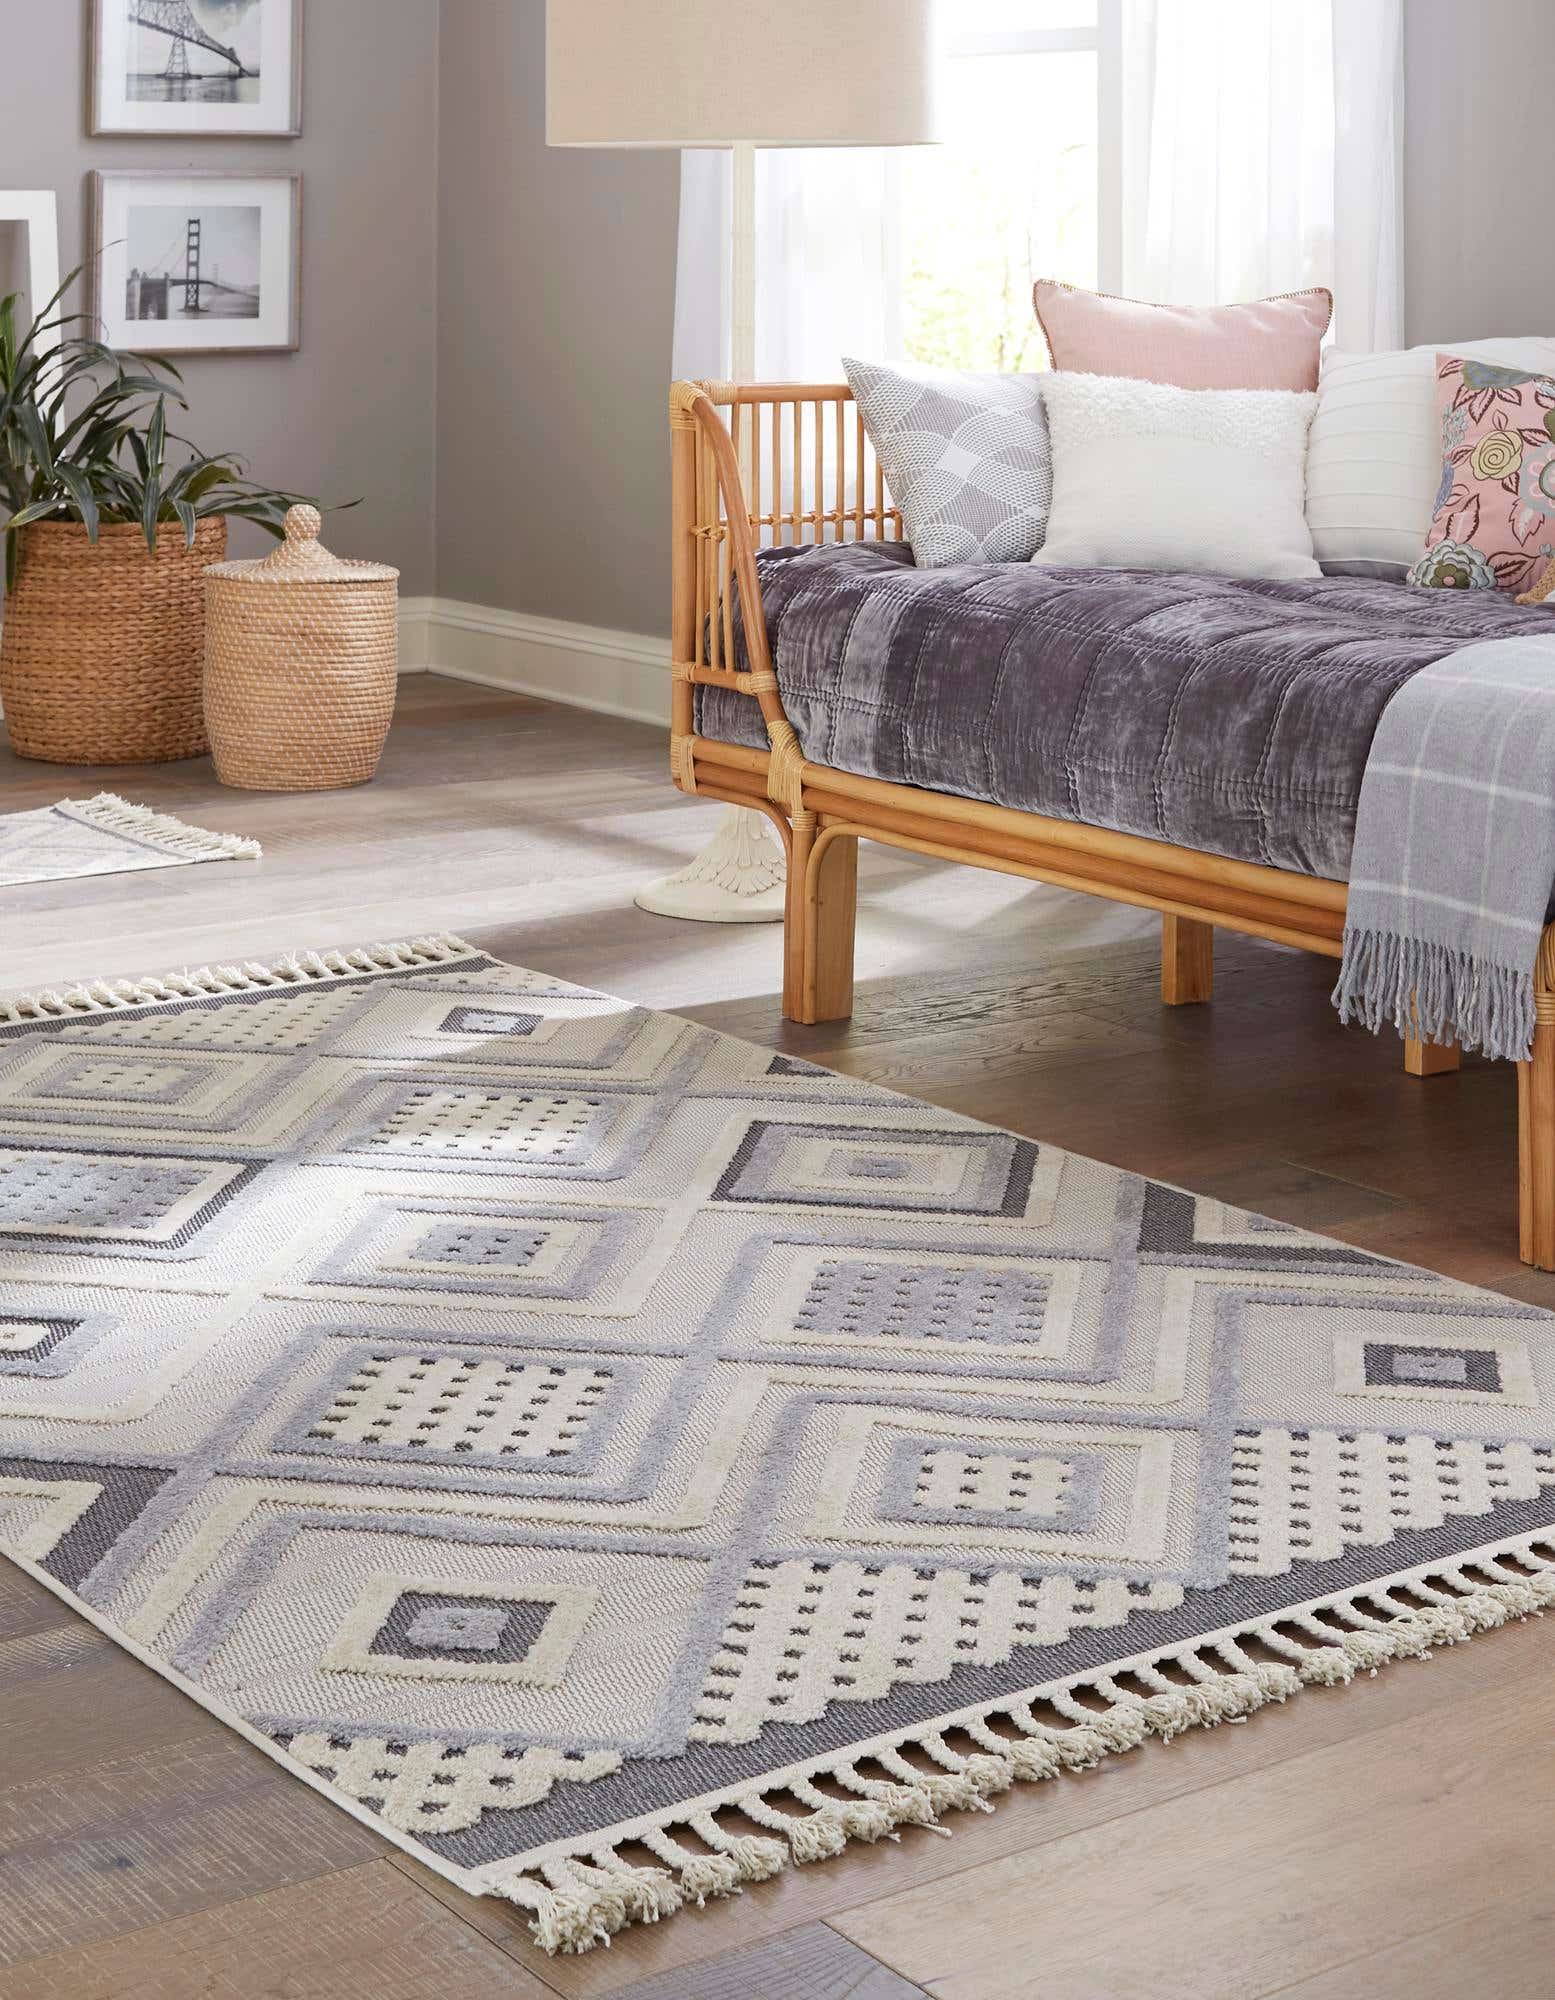 Boho vibes and mix of patterns from Rugs.com